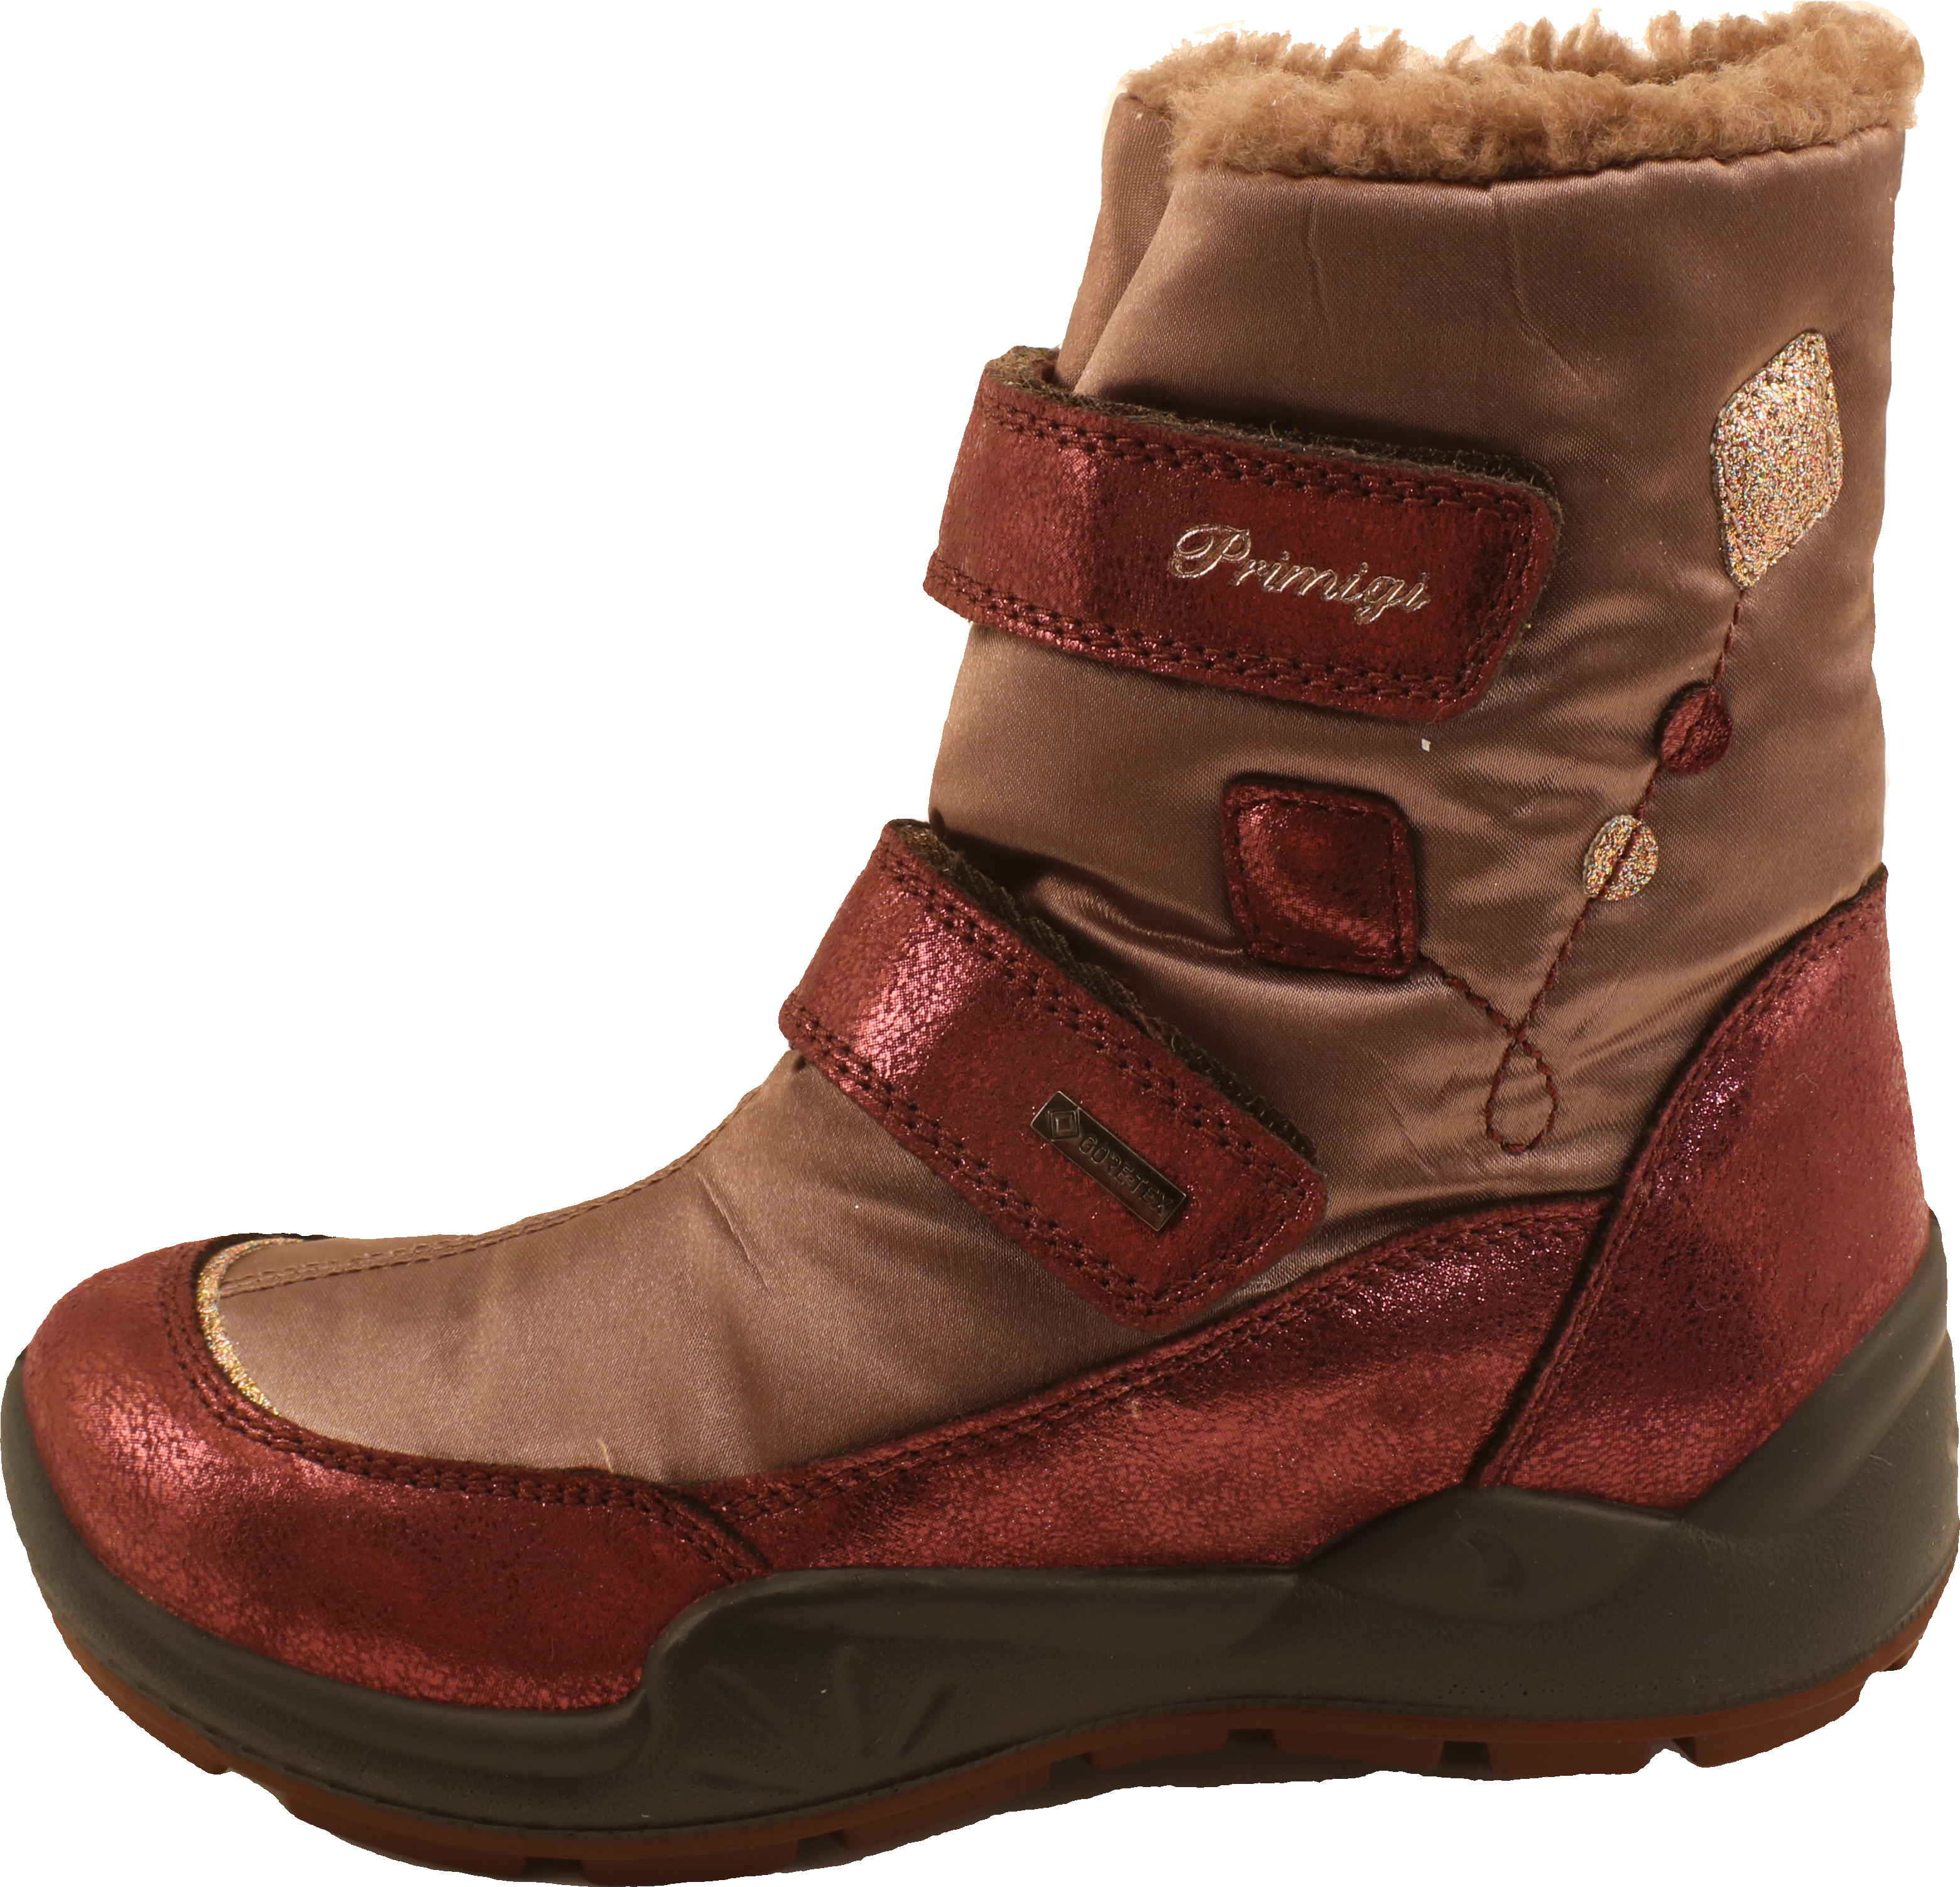 Pwigt 83841 - Dark red / Taupe Imitation leather